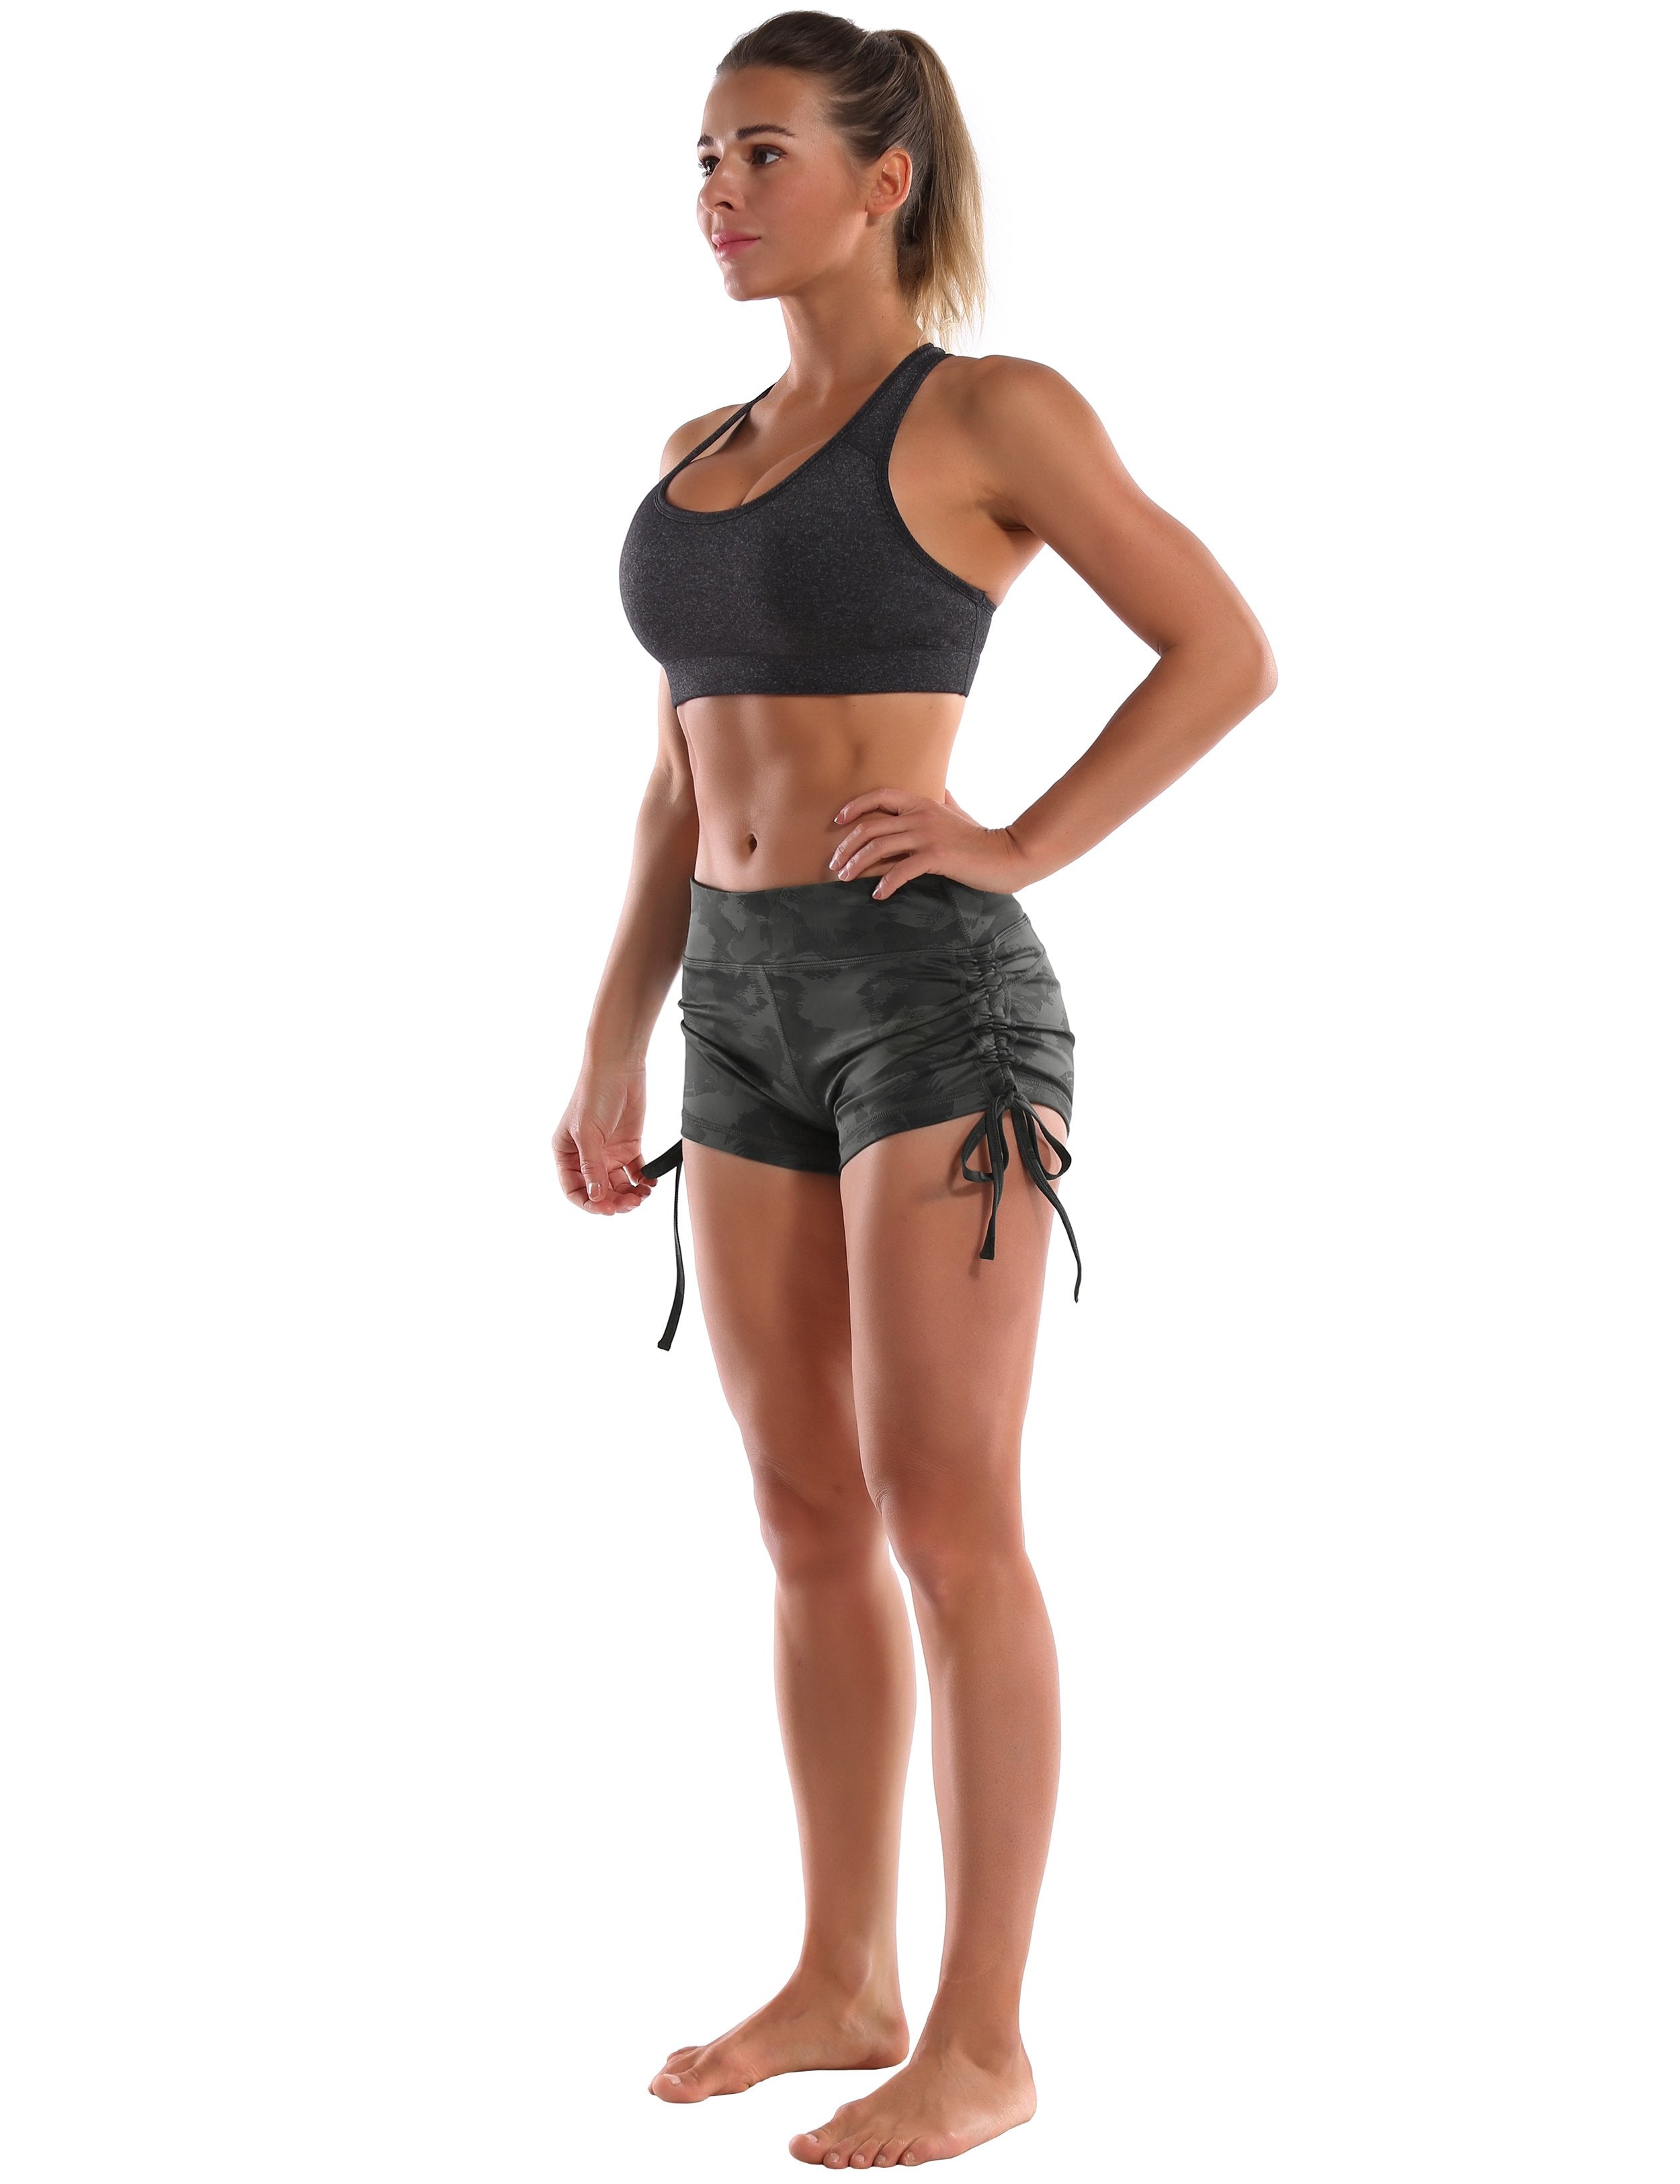 Printed Side Drawstring Hot Shorts dimgray brushcamo Sleek, soft, smooth and totally comfortable: our newest sexy style is here. Softest-ever fabric High elasticity High density 4-way stretch Fabric doesn't attract lint easily No see-through Moisture-wicking Machine wash 78% Polyester, 22% Spandex